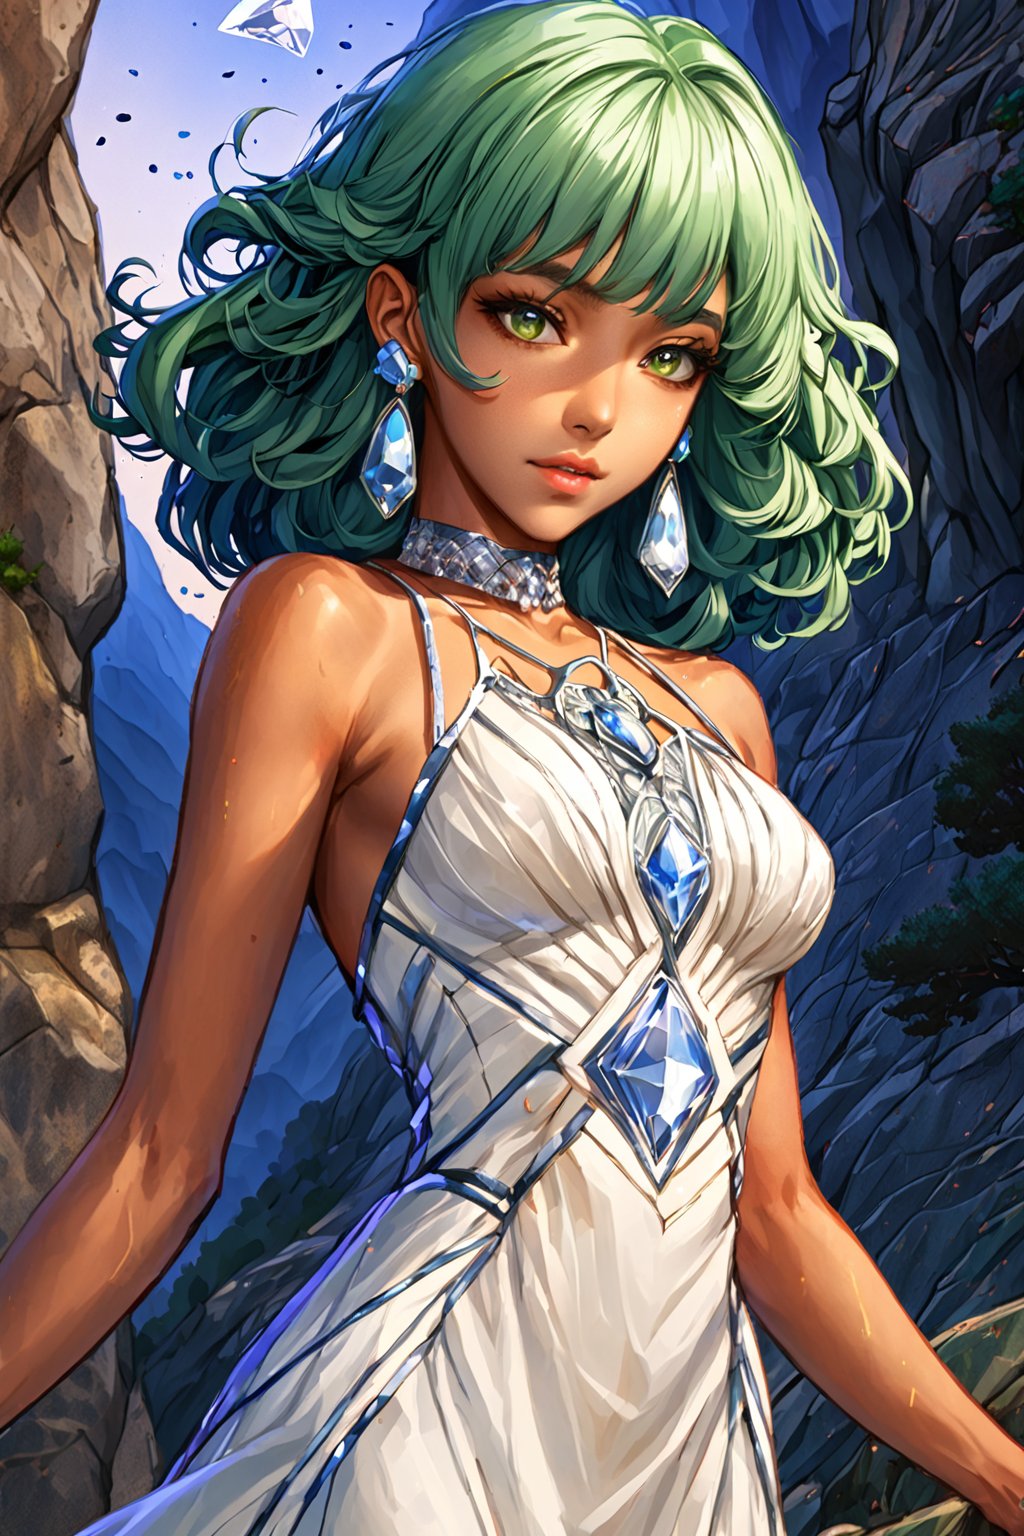 beautiful lady with theme of fantasy and sci-fi, (smirks : 2), green wavy hair, gray eyes, tanned skin, blushy face, beautiful blue make-up, high-heels, (tight patterned white dress : 1.8), (opala jewelry : 2), (crystal earings : 2), bad-omen concept girl, sensual, starlits skies, midnight cliff, full body view, (uhd, hdr, post-processing, vivid colors, high-contrast, realistic lighting, bloom lighting), (depht of field : 2), (realistic anime cgi art : 1.4), (manhwa wallpaper art : 1.4), (yoongonji art : 2),